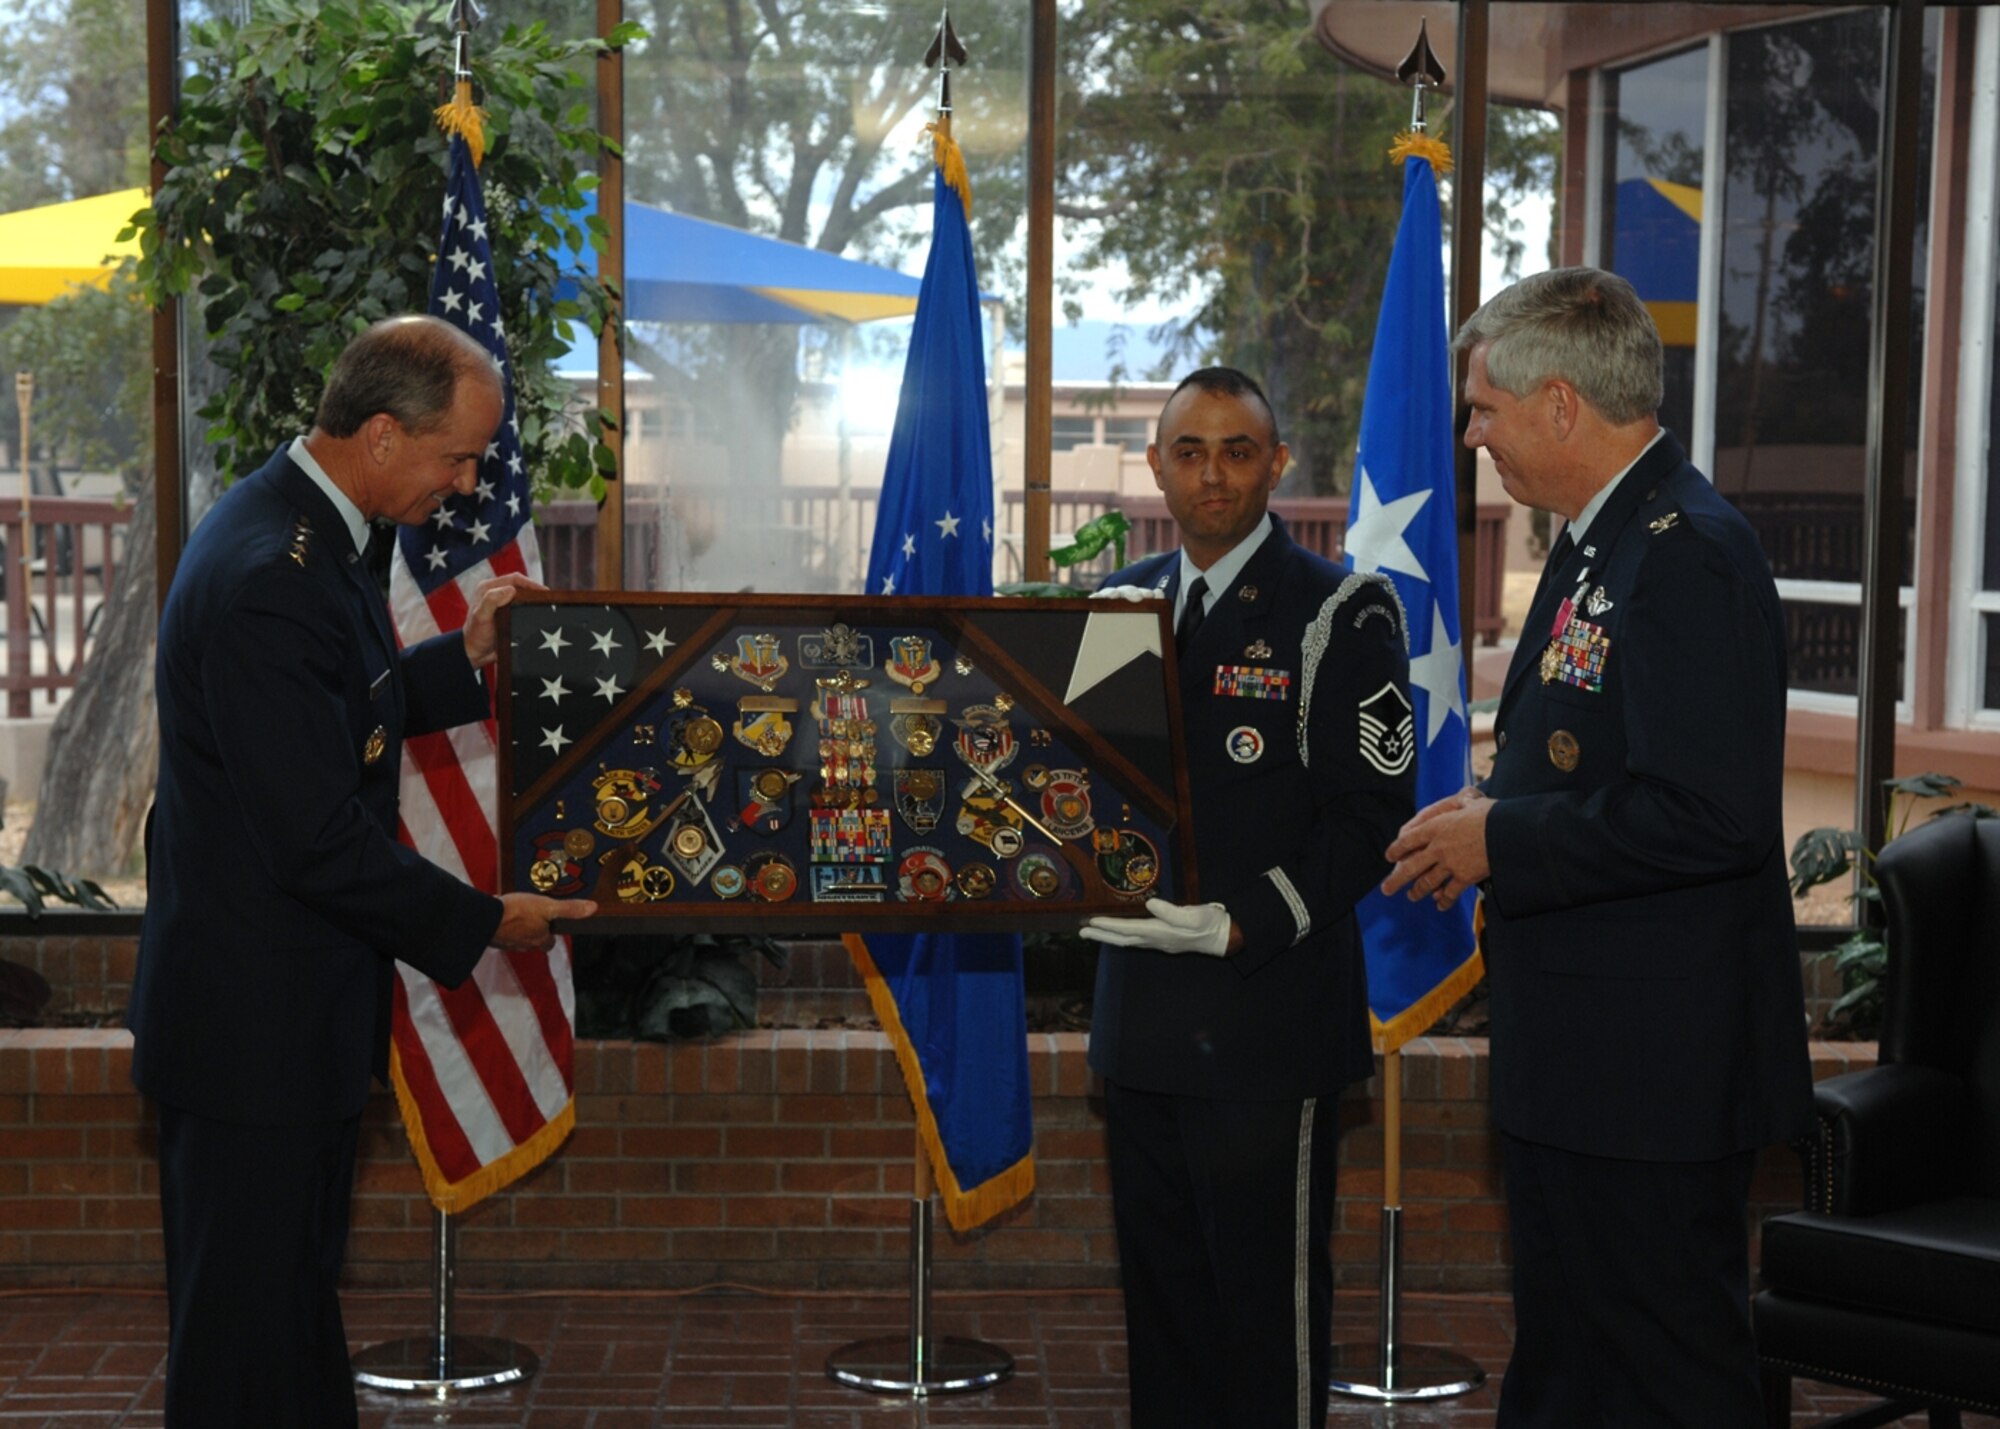 Gen. Kevin Chilton and Master Sgt. Paul Sanchez, Steel Talons NCOIC, present Colonel Moore his final retirement gift -- a shadow box.  (U.S. Air Force photo by Airman 1st Class Jamal Sutter)